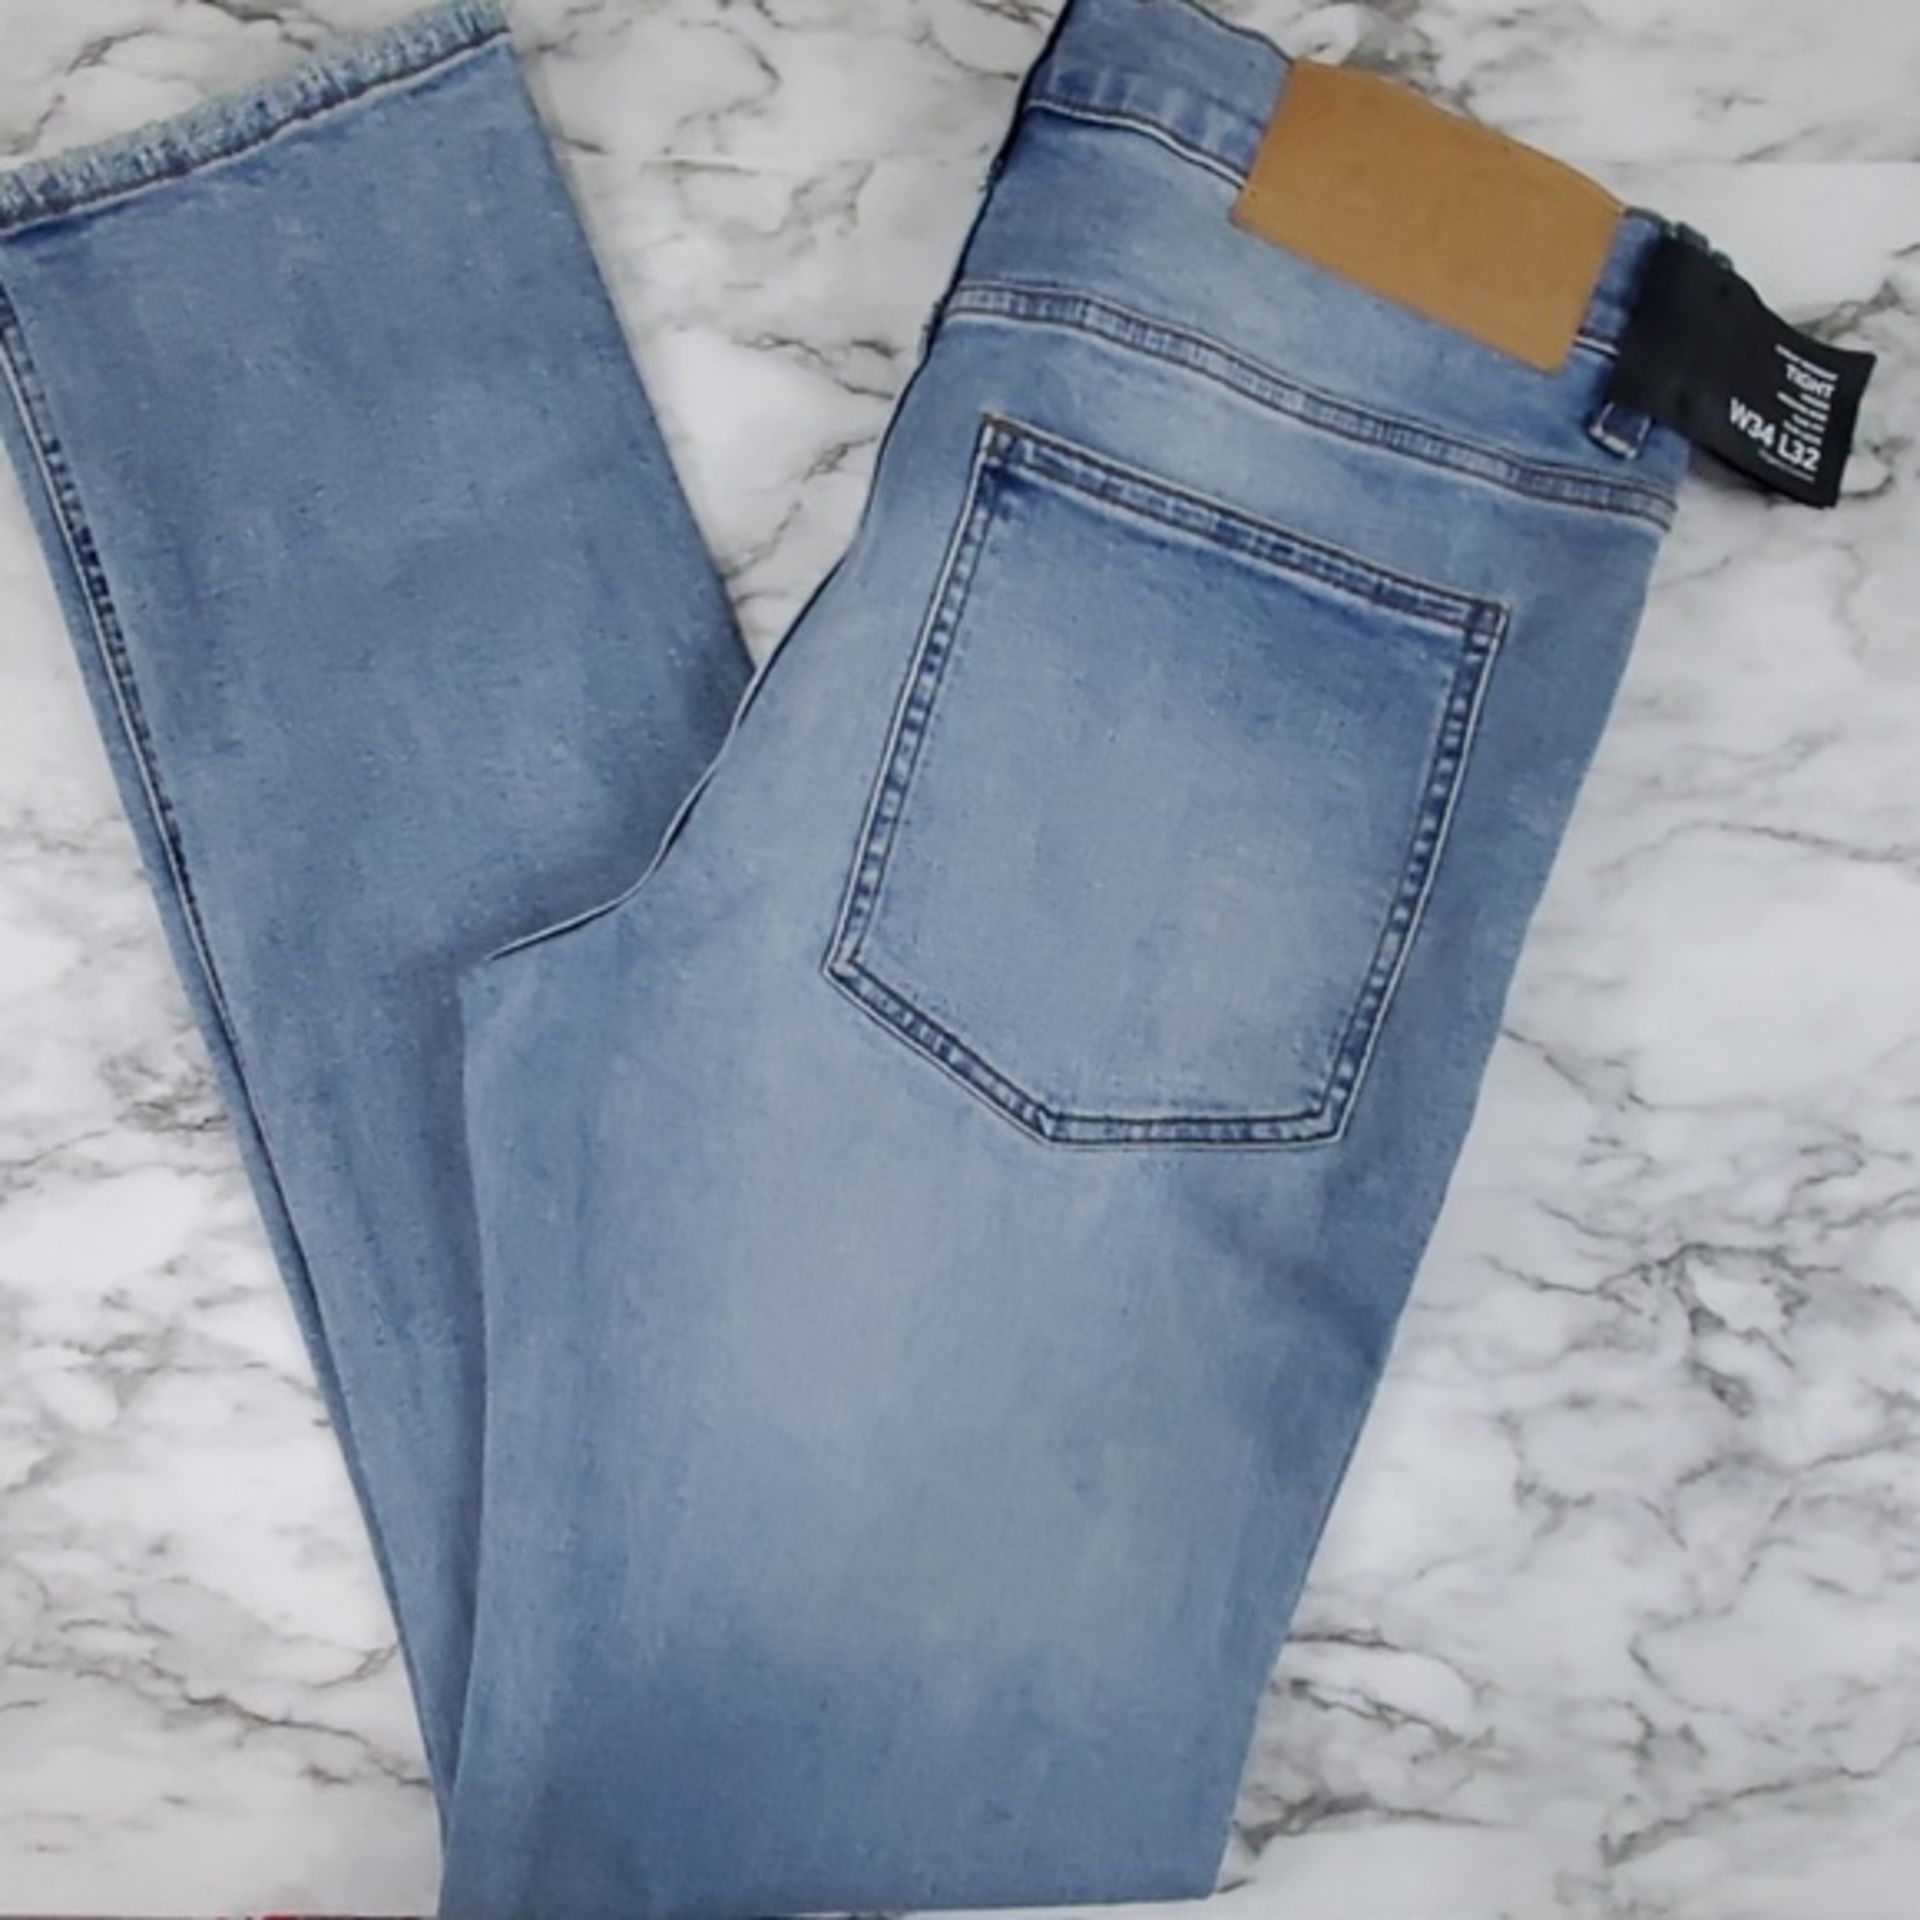 Cheap Monday In Law Jeans. Style: Tapered Crop. See descripion for sizes. Total RRP £225.00. - Image 2 of 2